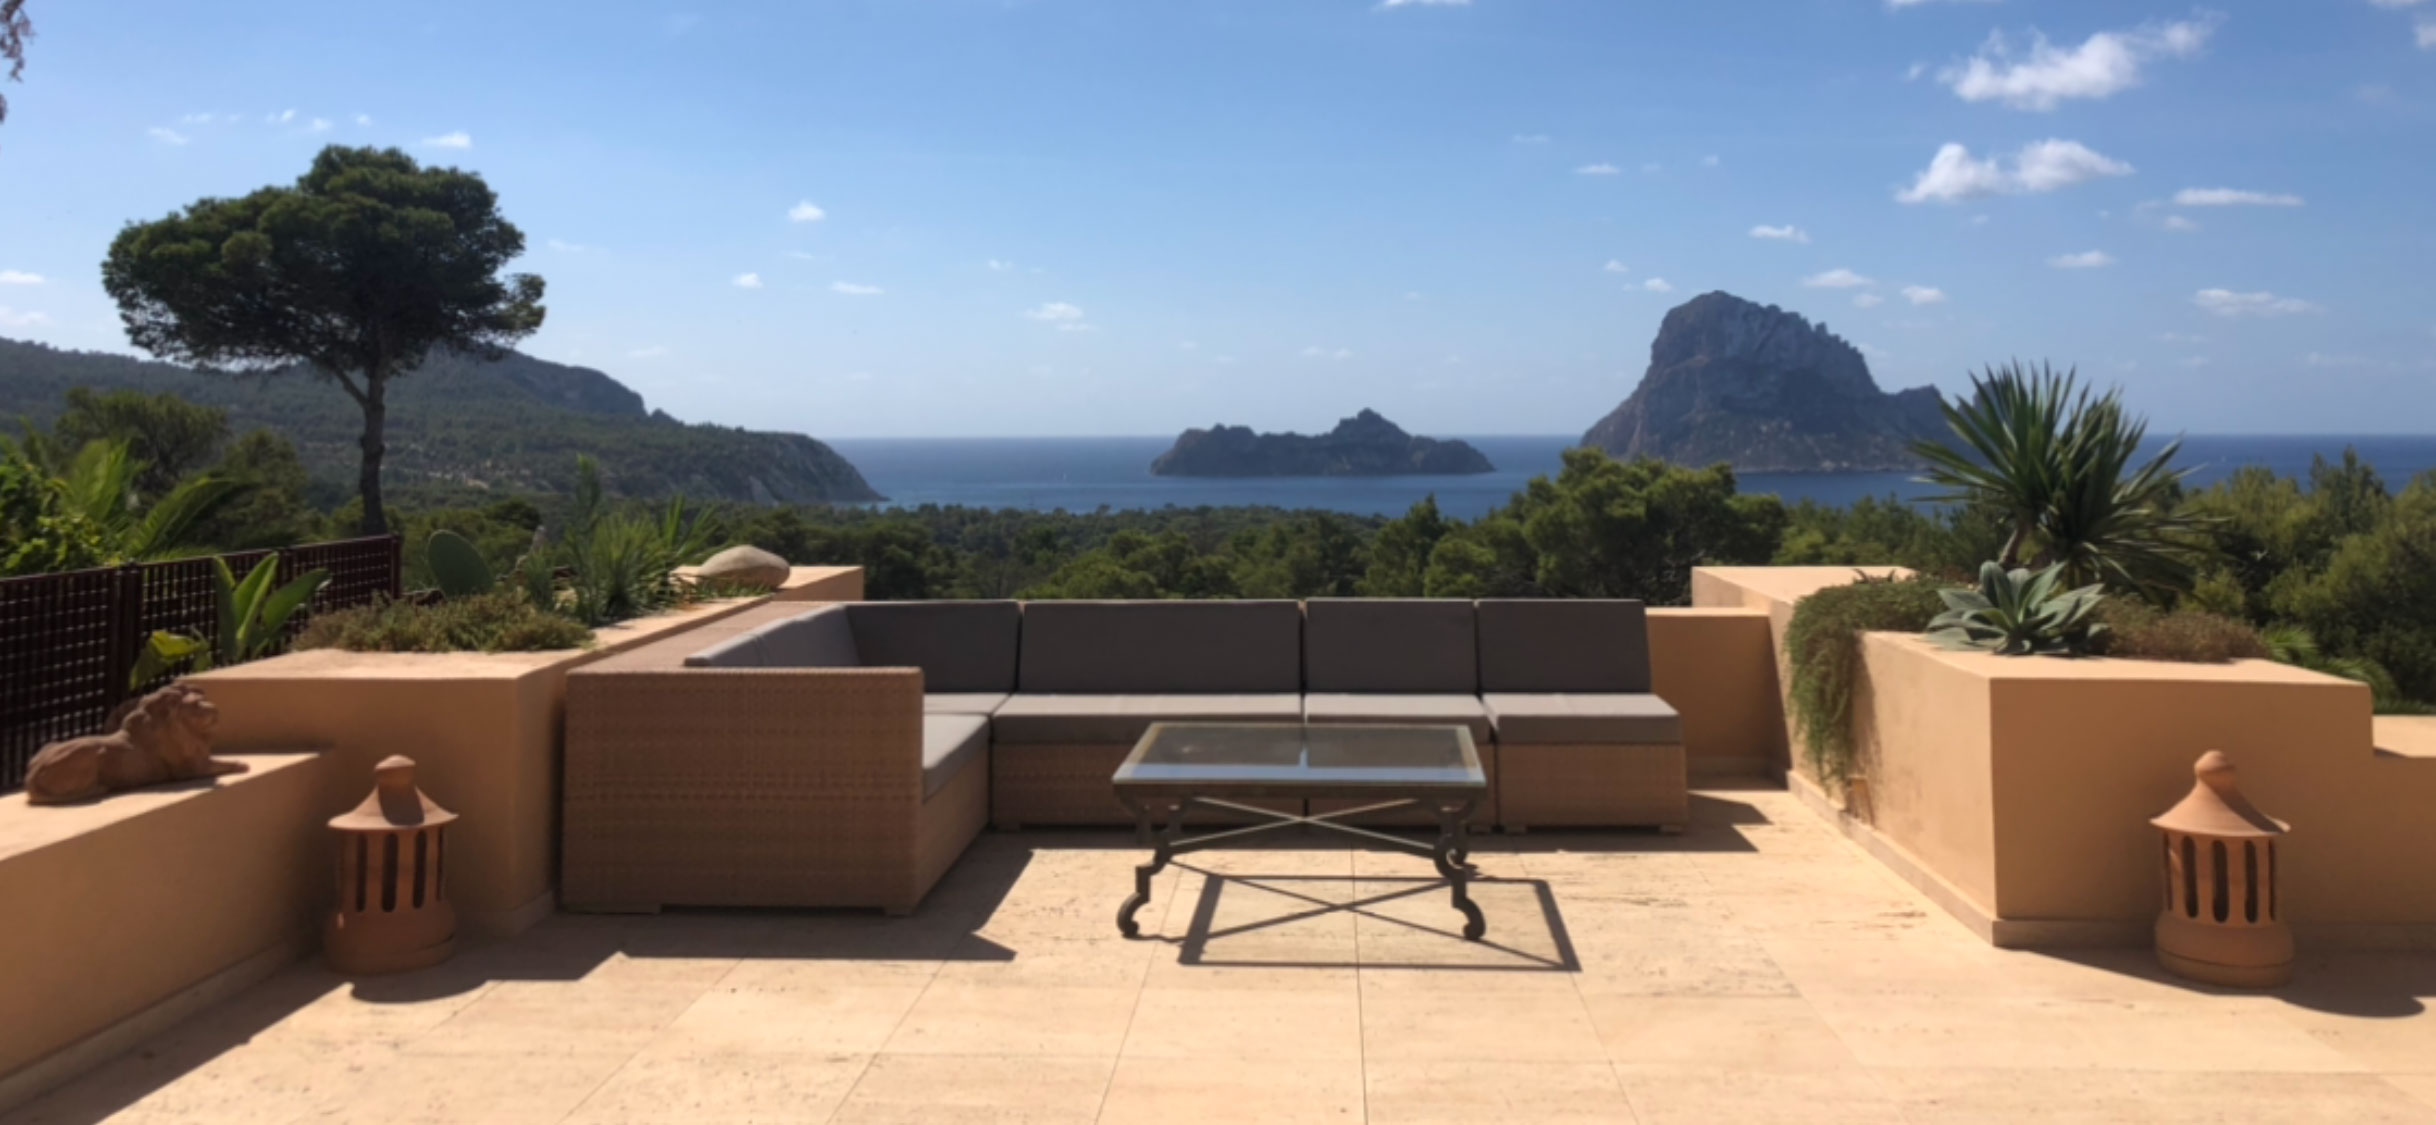 This is a unique apartment with a direct view of the Es Vedra